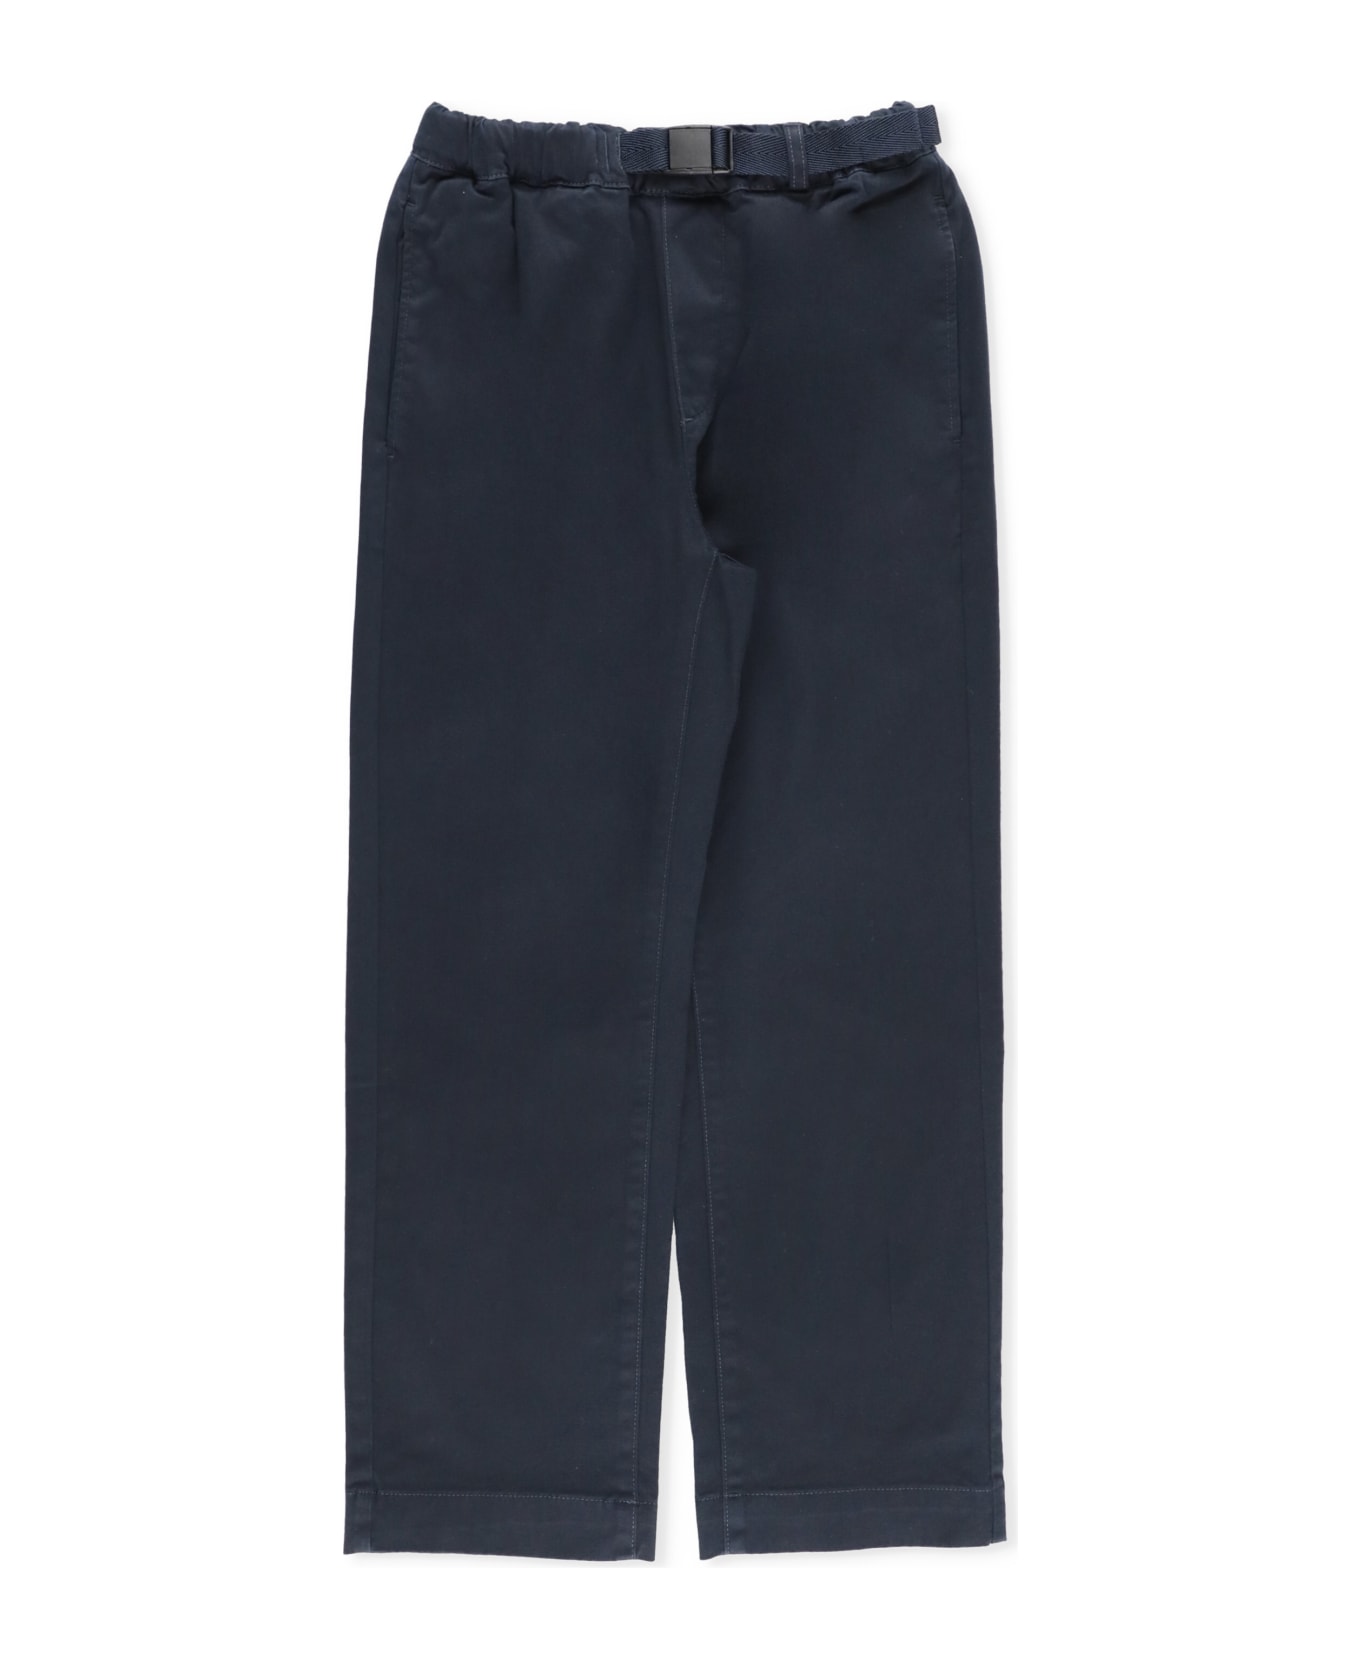 Woolrich Outdoor Pants - NAVY ボトムス